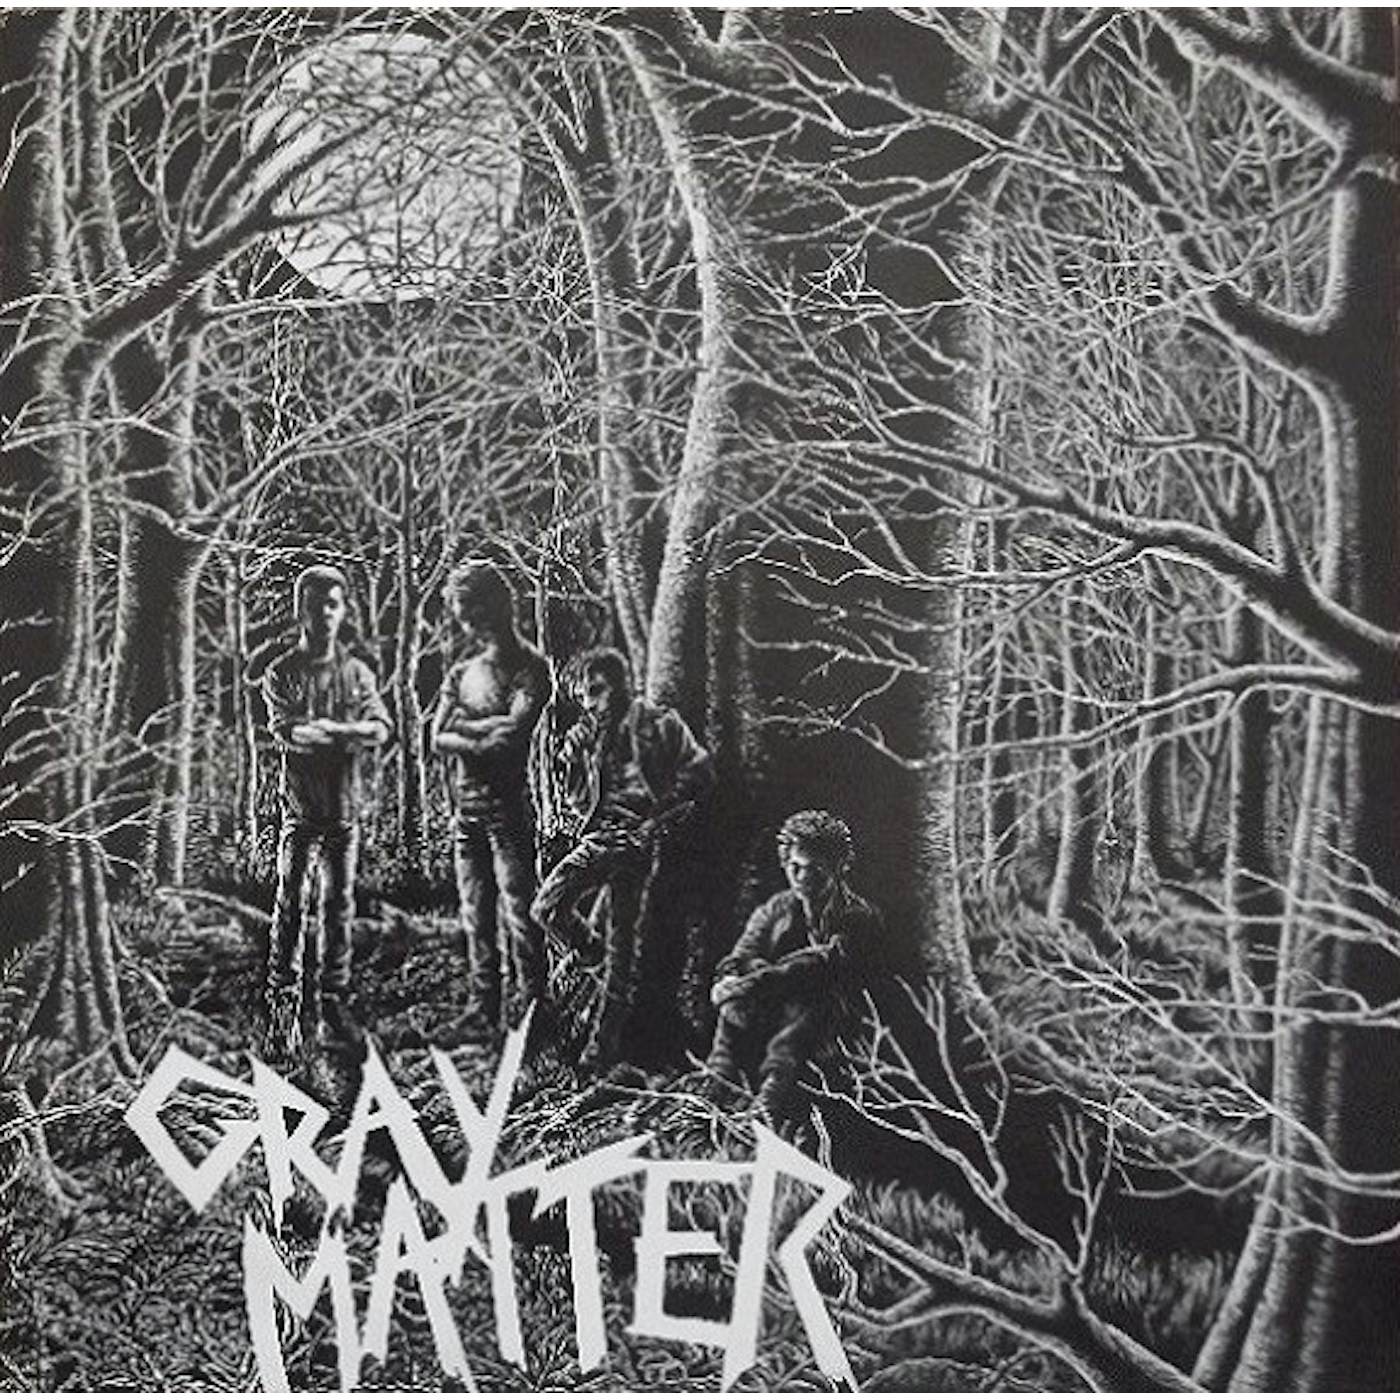 Gray Matter FOOD FOR THOUGHT Vinyl Record